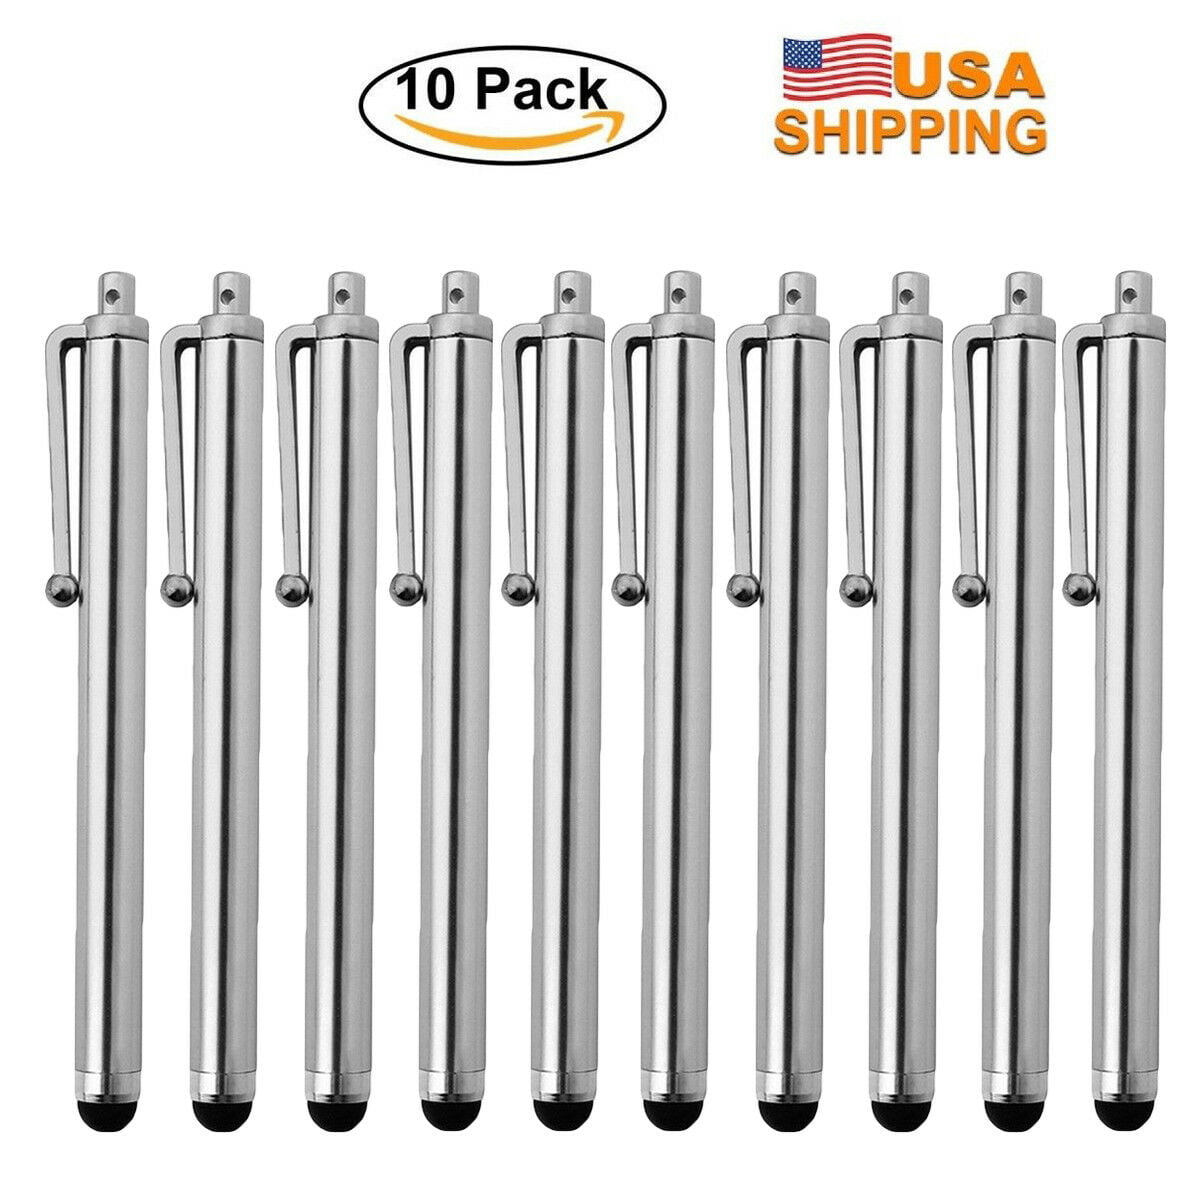 10pcs Metal Universal Stylus Pen Touch Screen For Cell Phone Tablet iPod iPad PC 